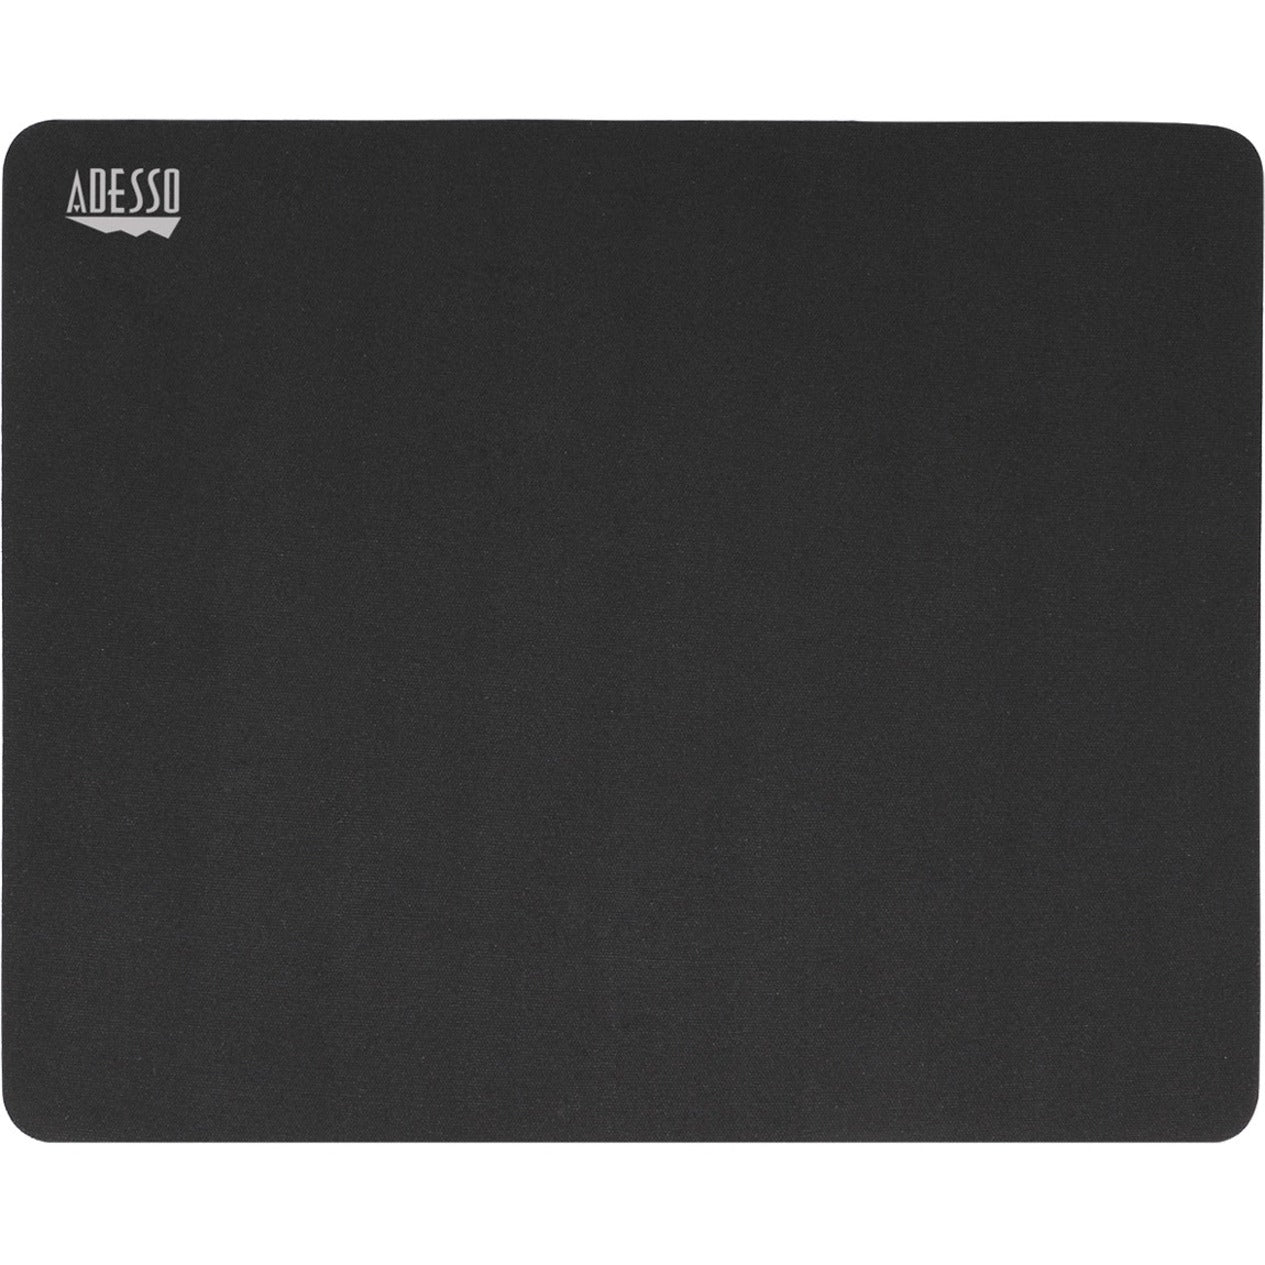 Adesso TRUFORM P100 9" x 7" Mouse Pad, Optical/Laser Compatible, Smooth, Anti-slip, Scratch Resistant